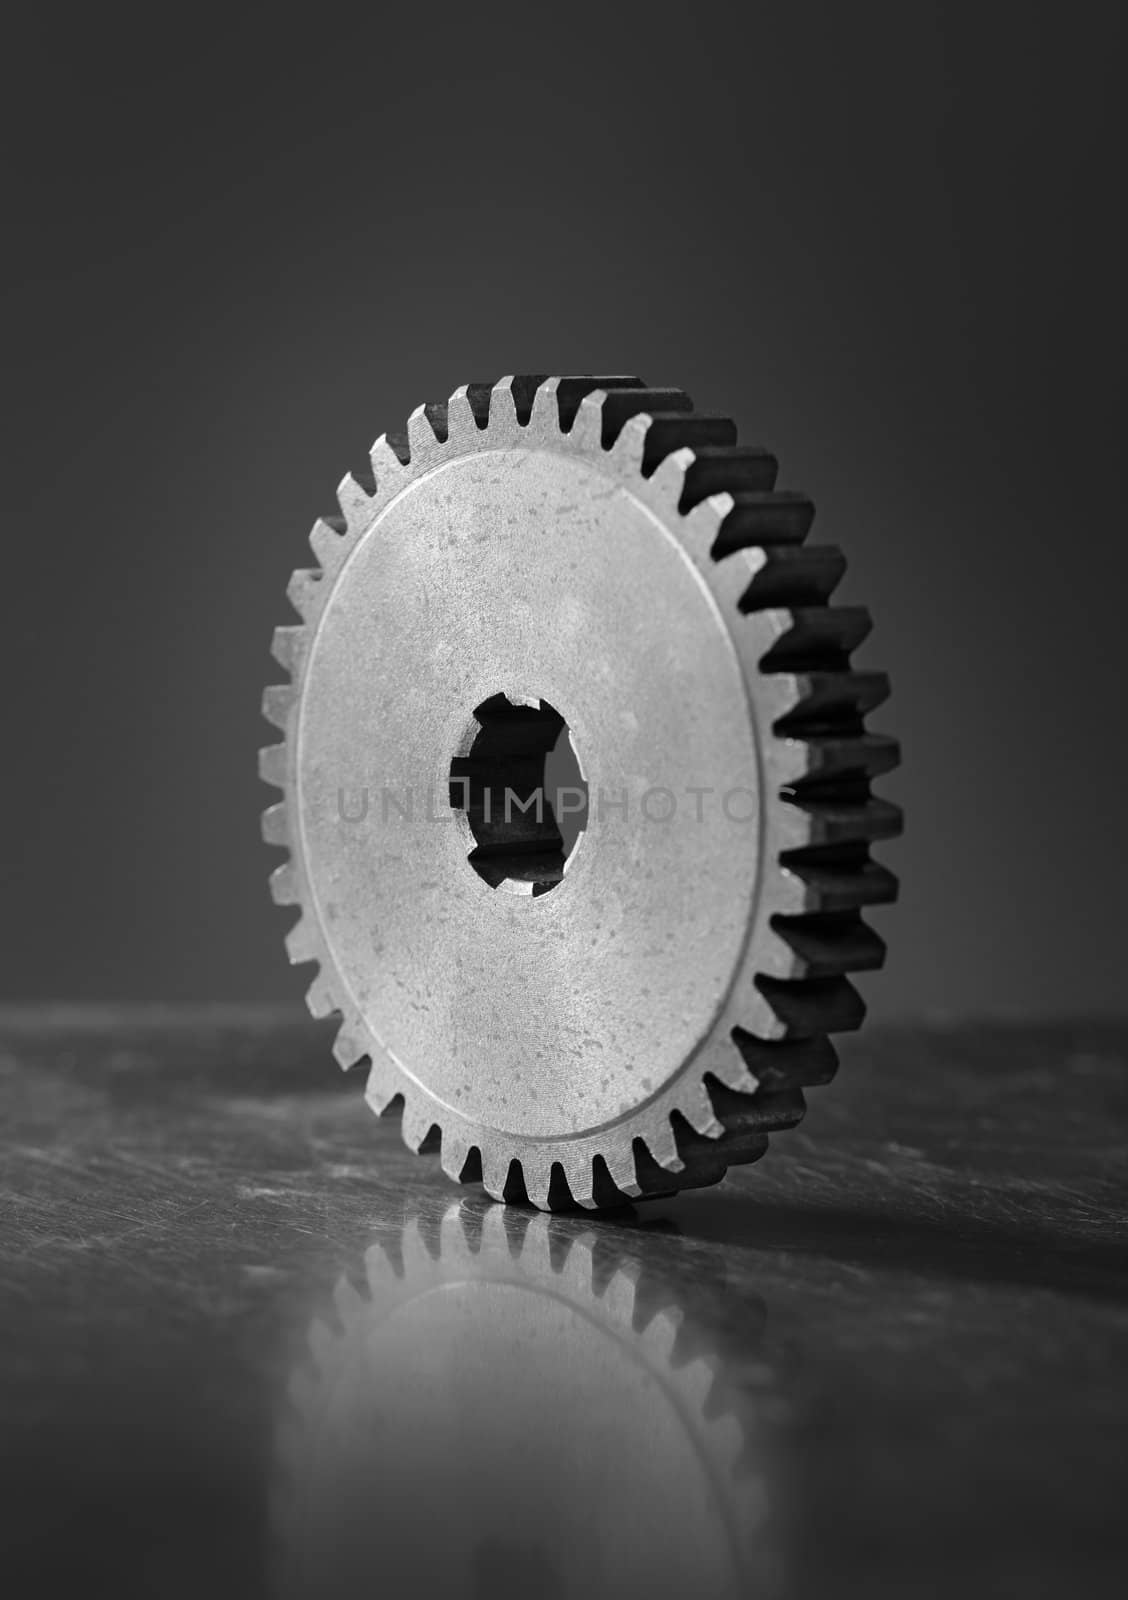 Black and white image of an old metallic cog gear on scratched metallic background. Short depth-of-field.